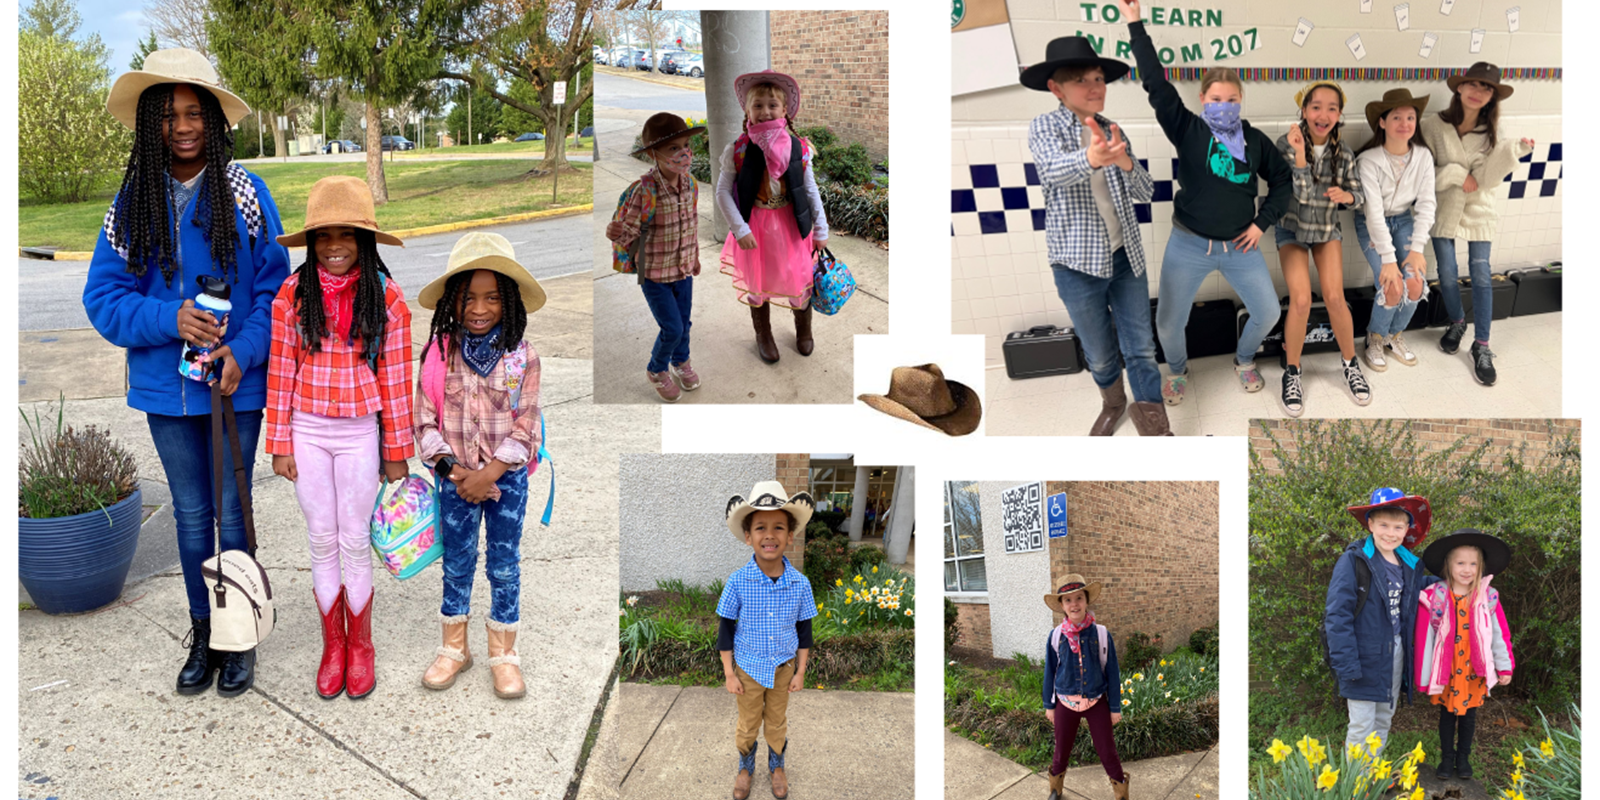 Students in western outfits. 